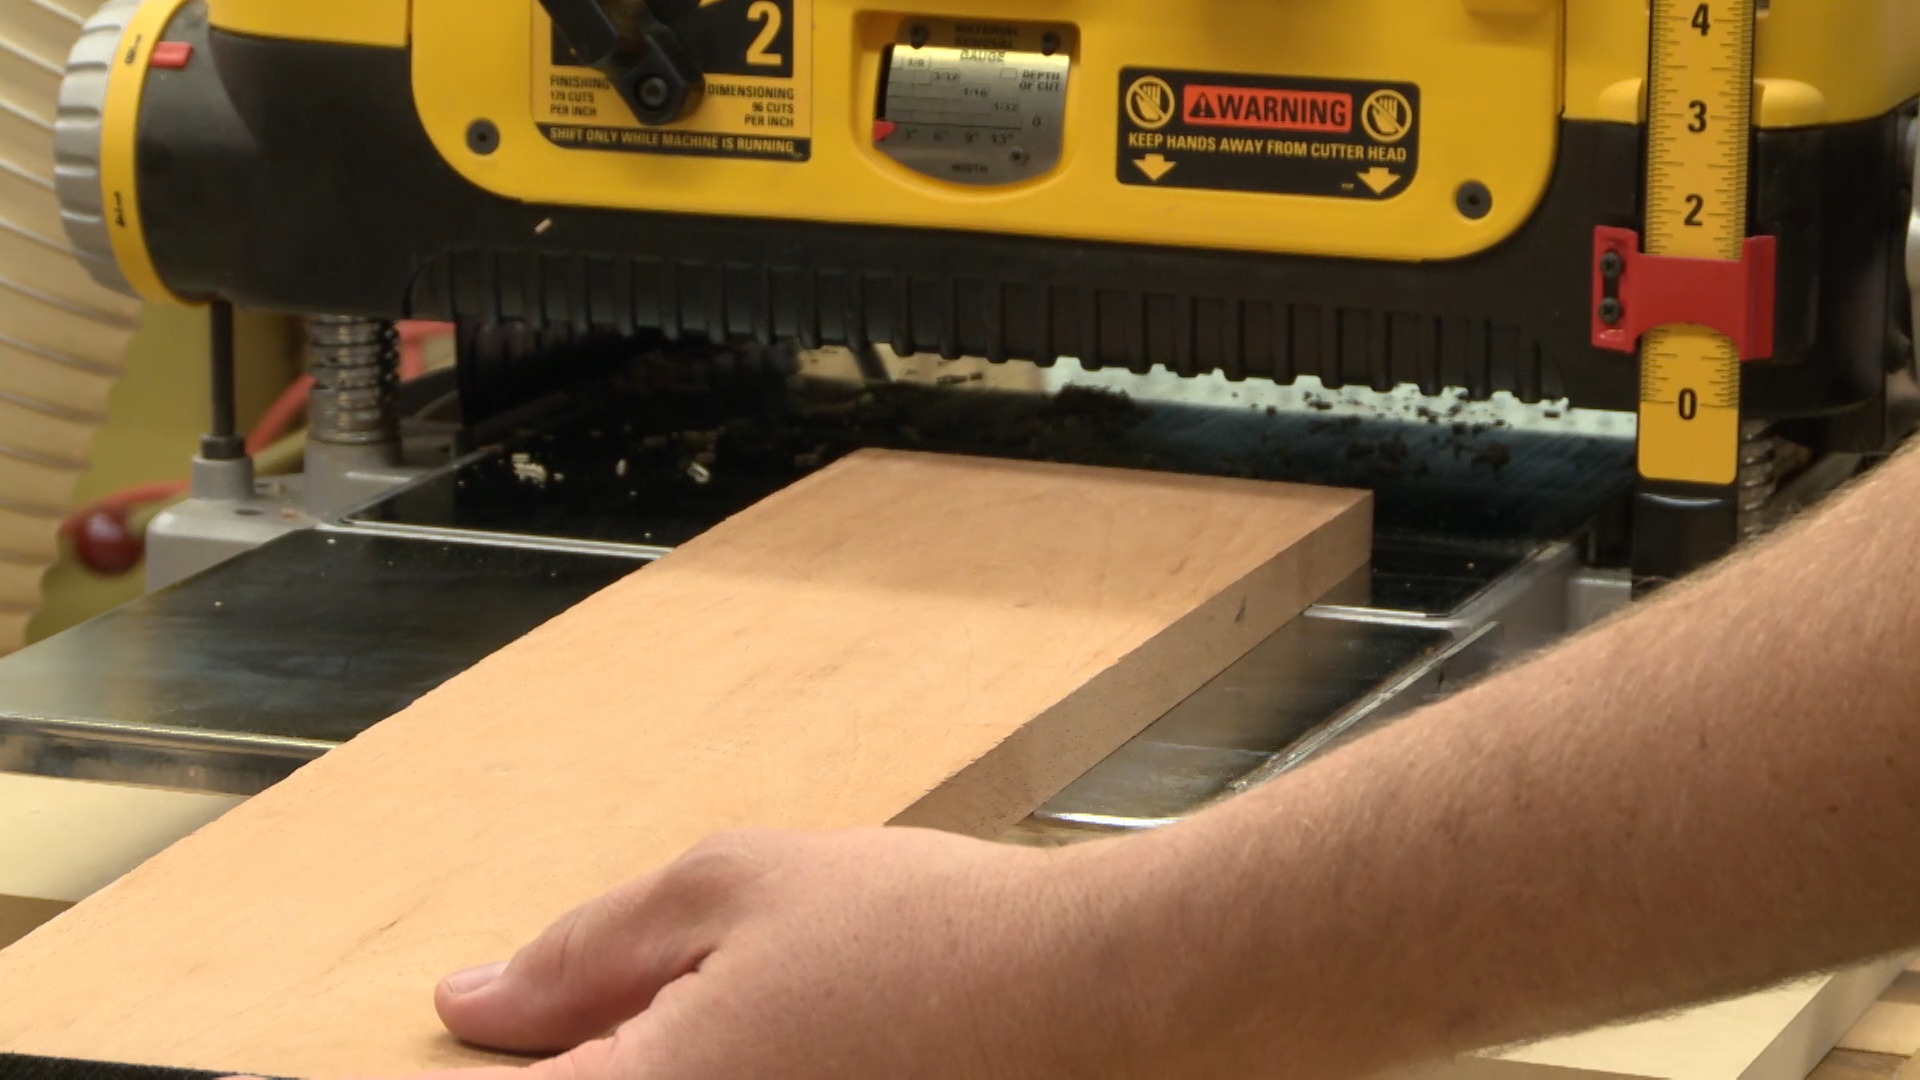 Session 6: Using the Planer